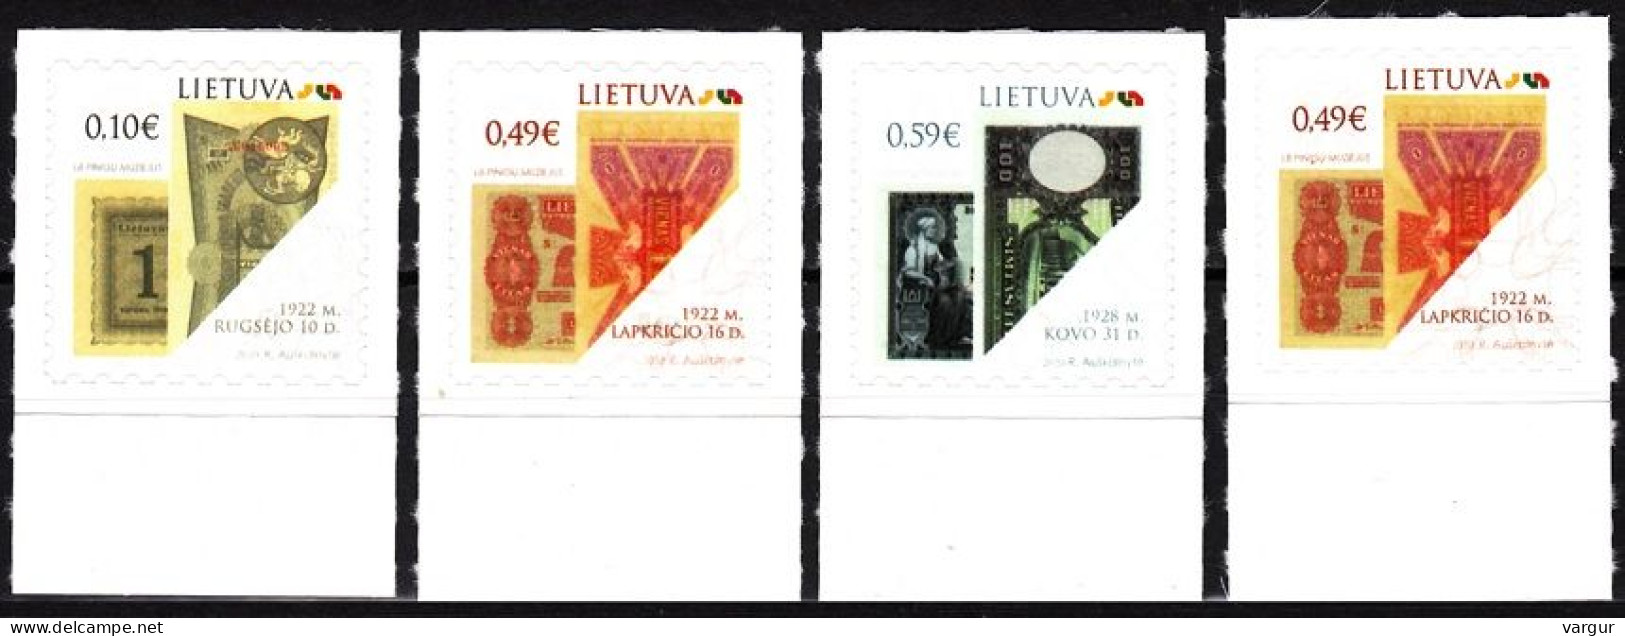 LITHUANIA 2020-01 Definitive: Historical Paper Money. With Variety 49c, Mint - Monete